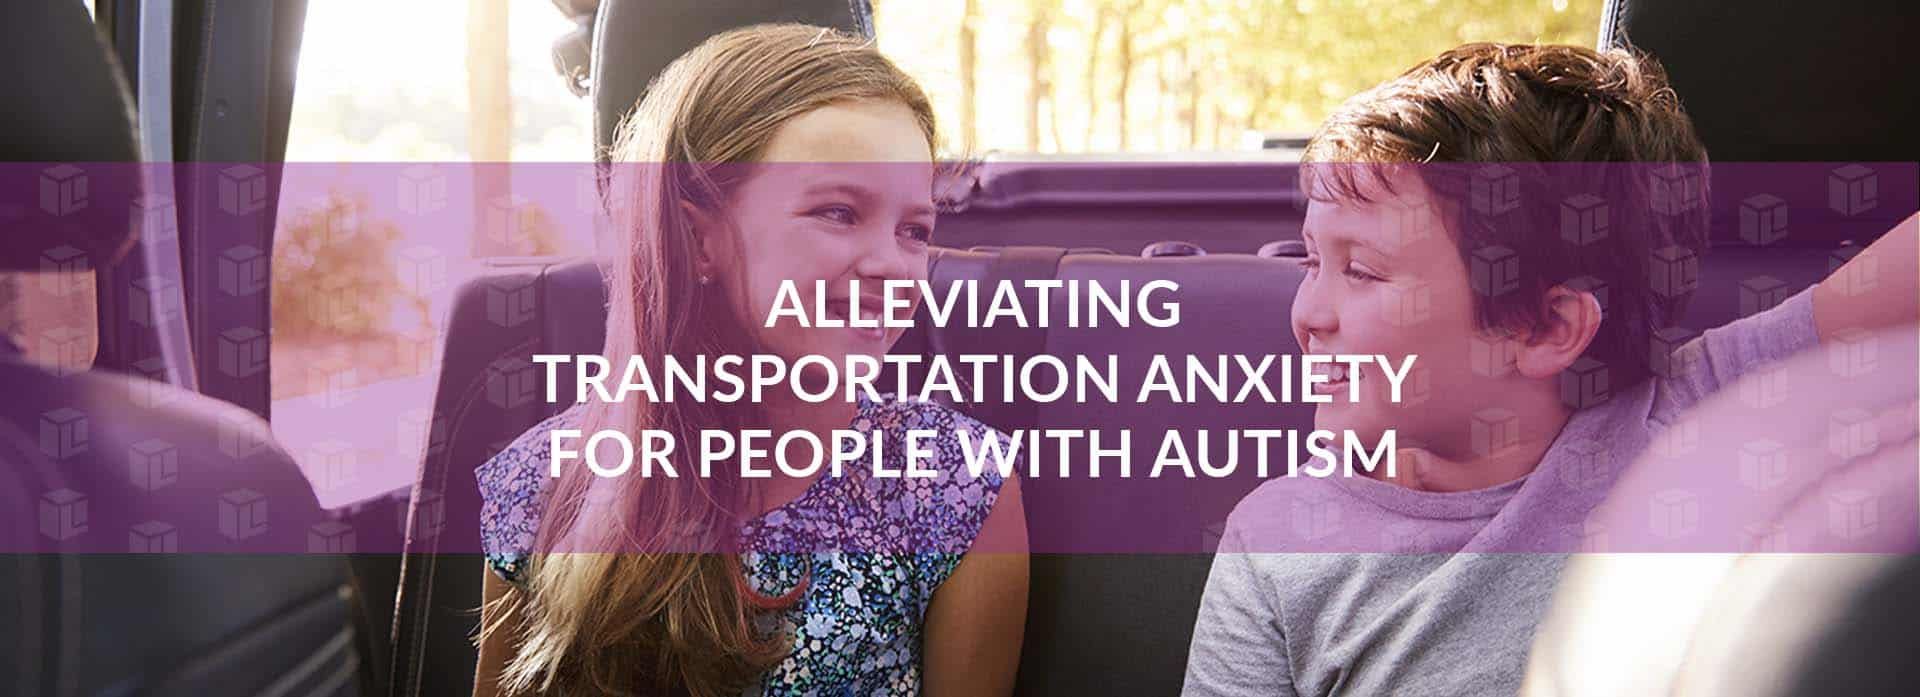 Alleviating Transportation Anxiety For People With Autism Alleviating Transportation Anxiety For People With Autism Alleviating Transportation Anxiety For People With Autism Alleviating Transportation Anxiety For People With Autism